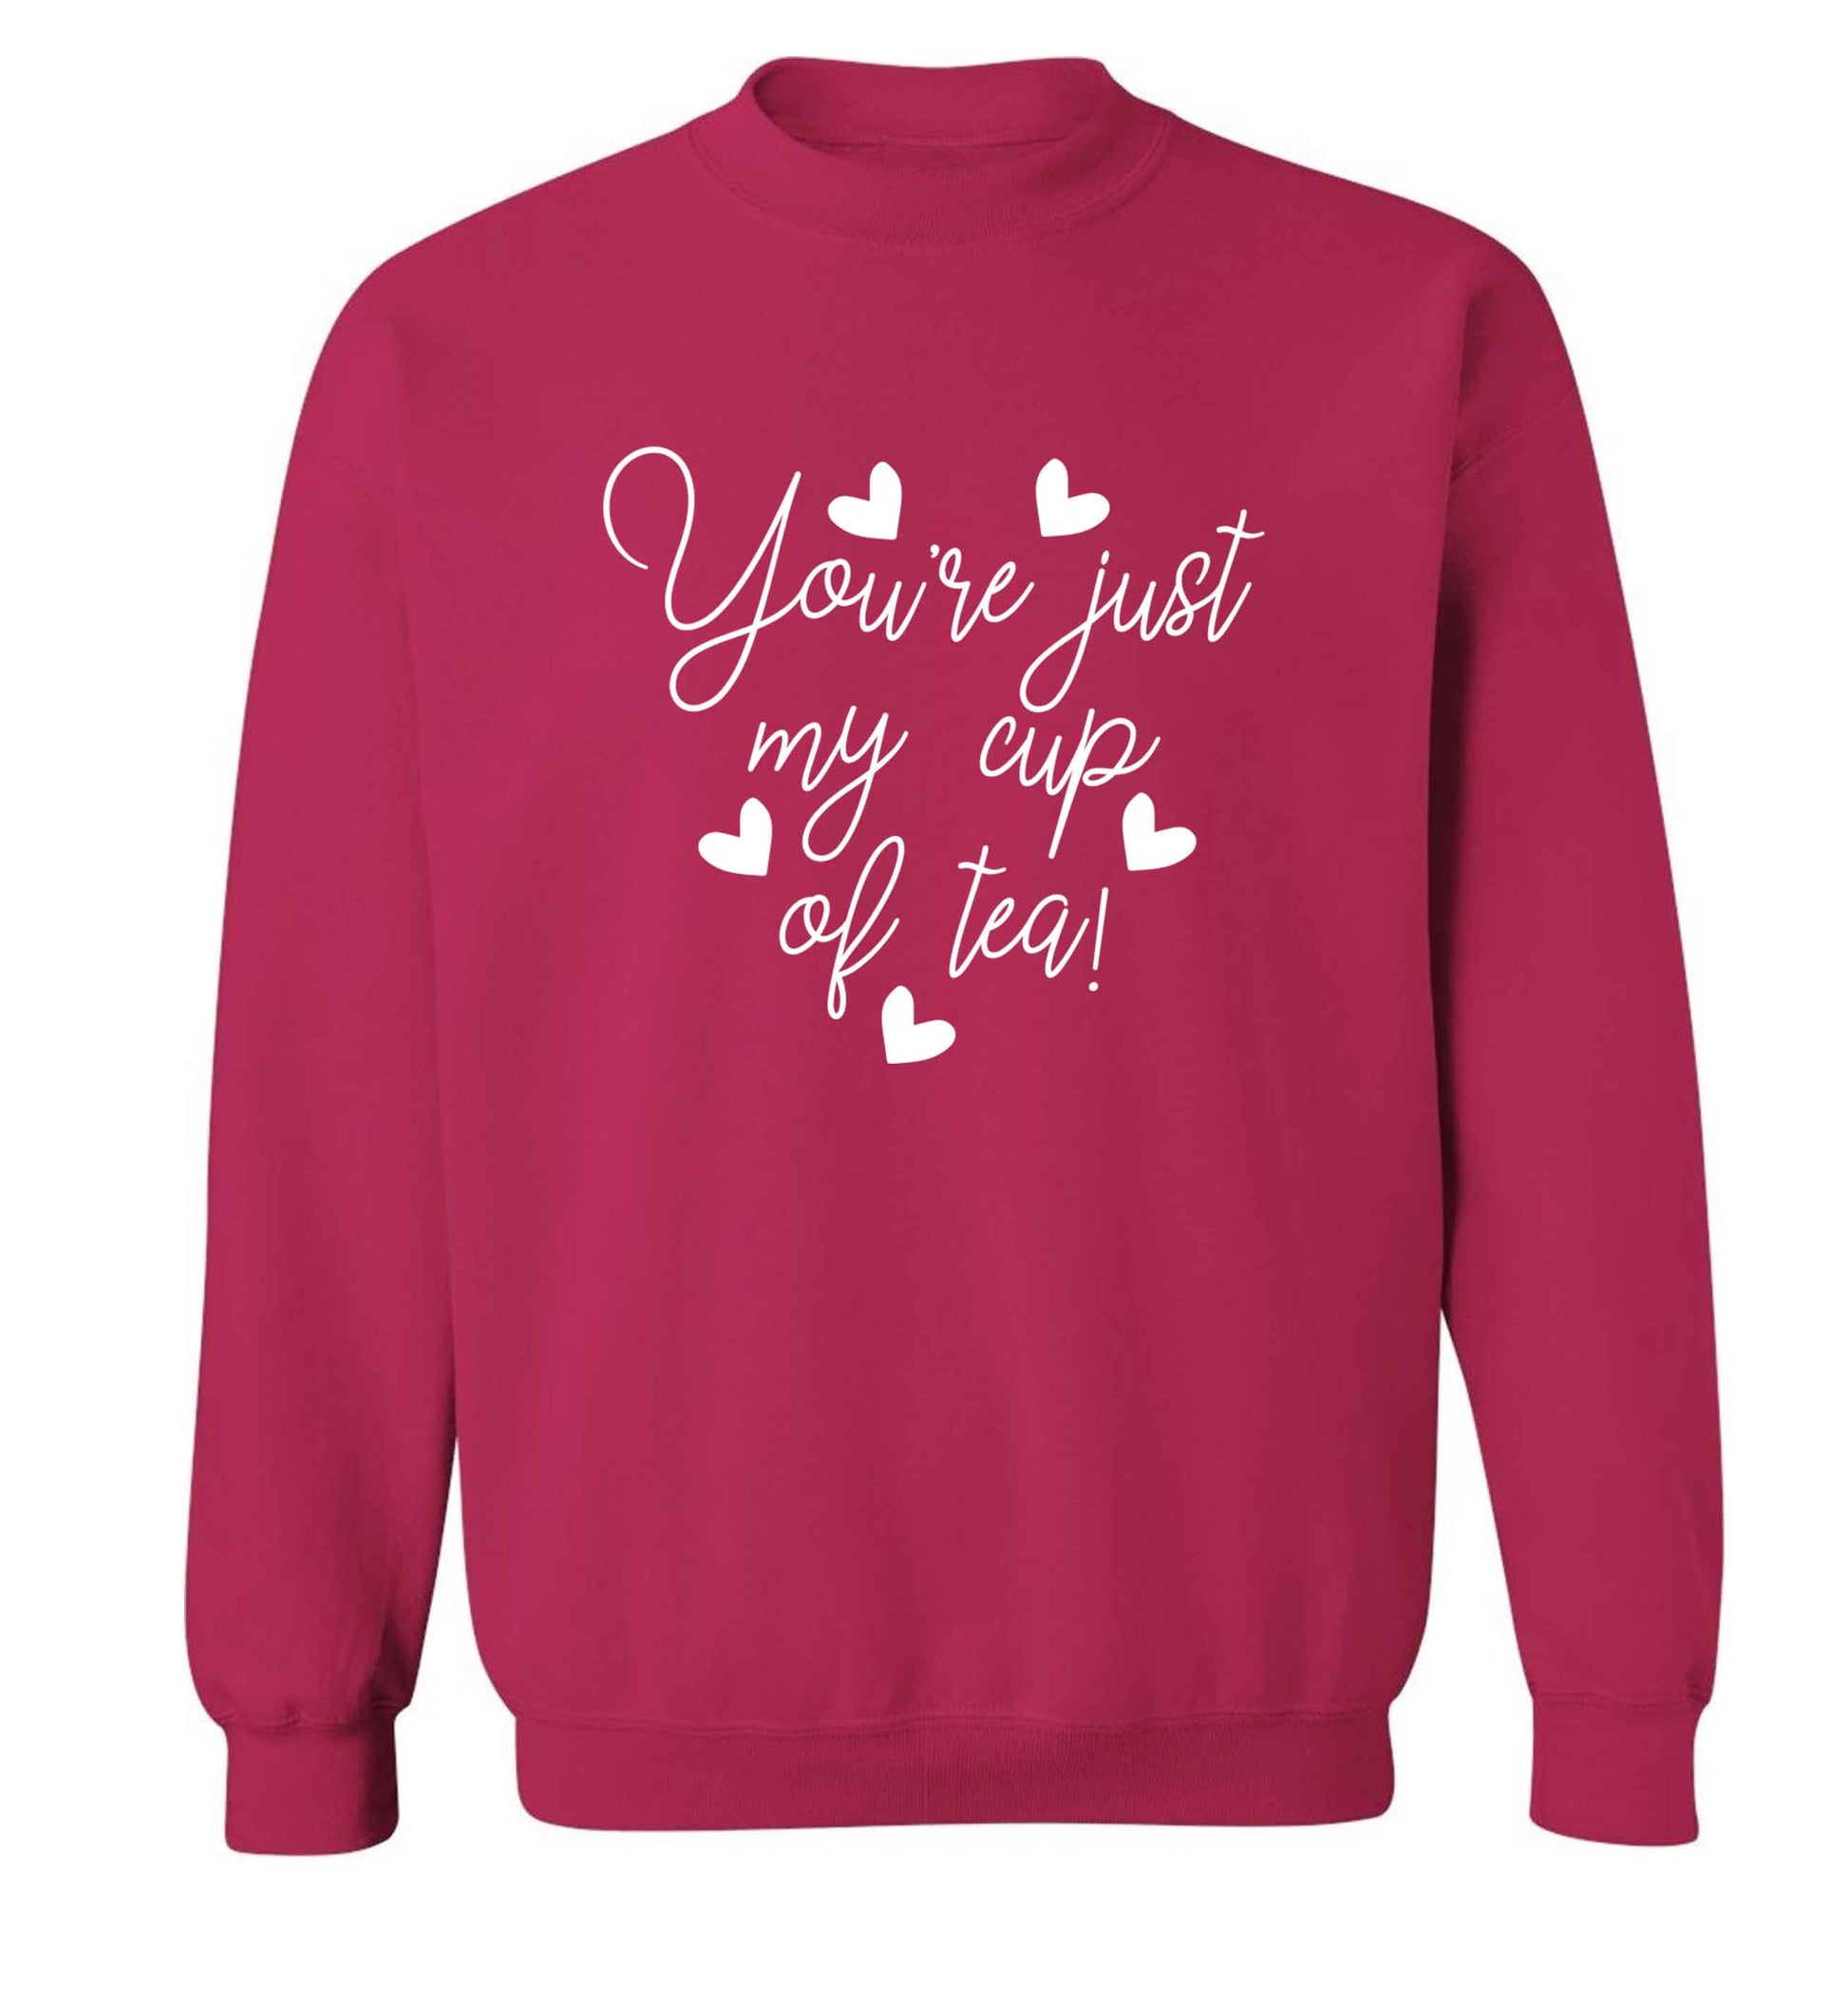 You're just my cup of tea adult's unisex pink sweater 2XL